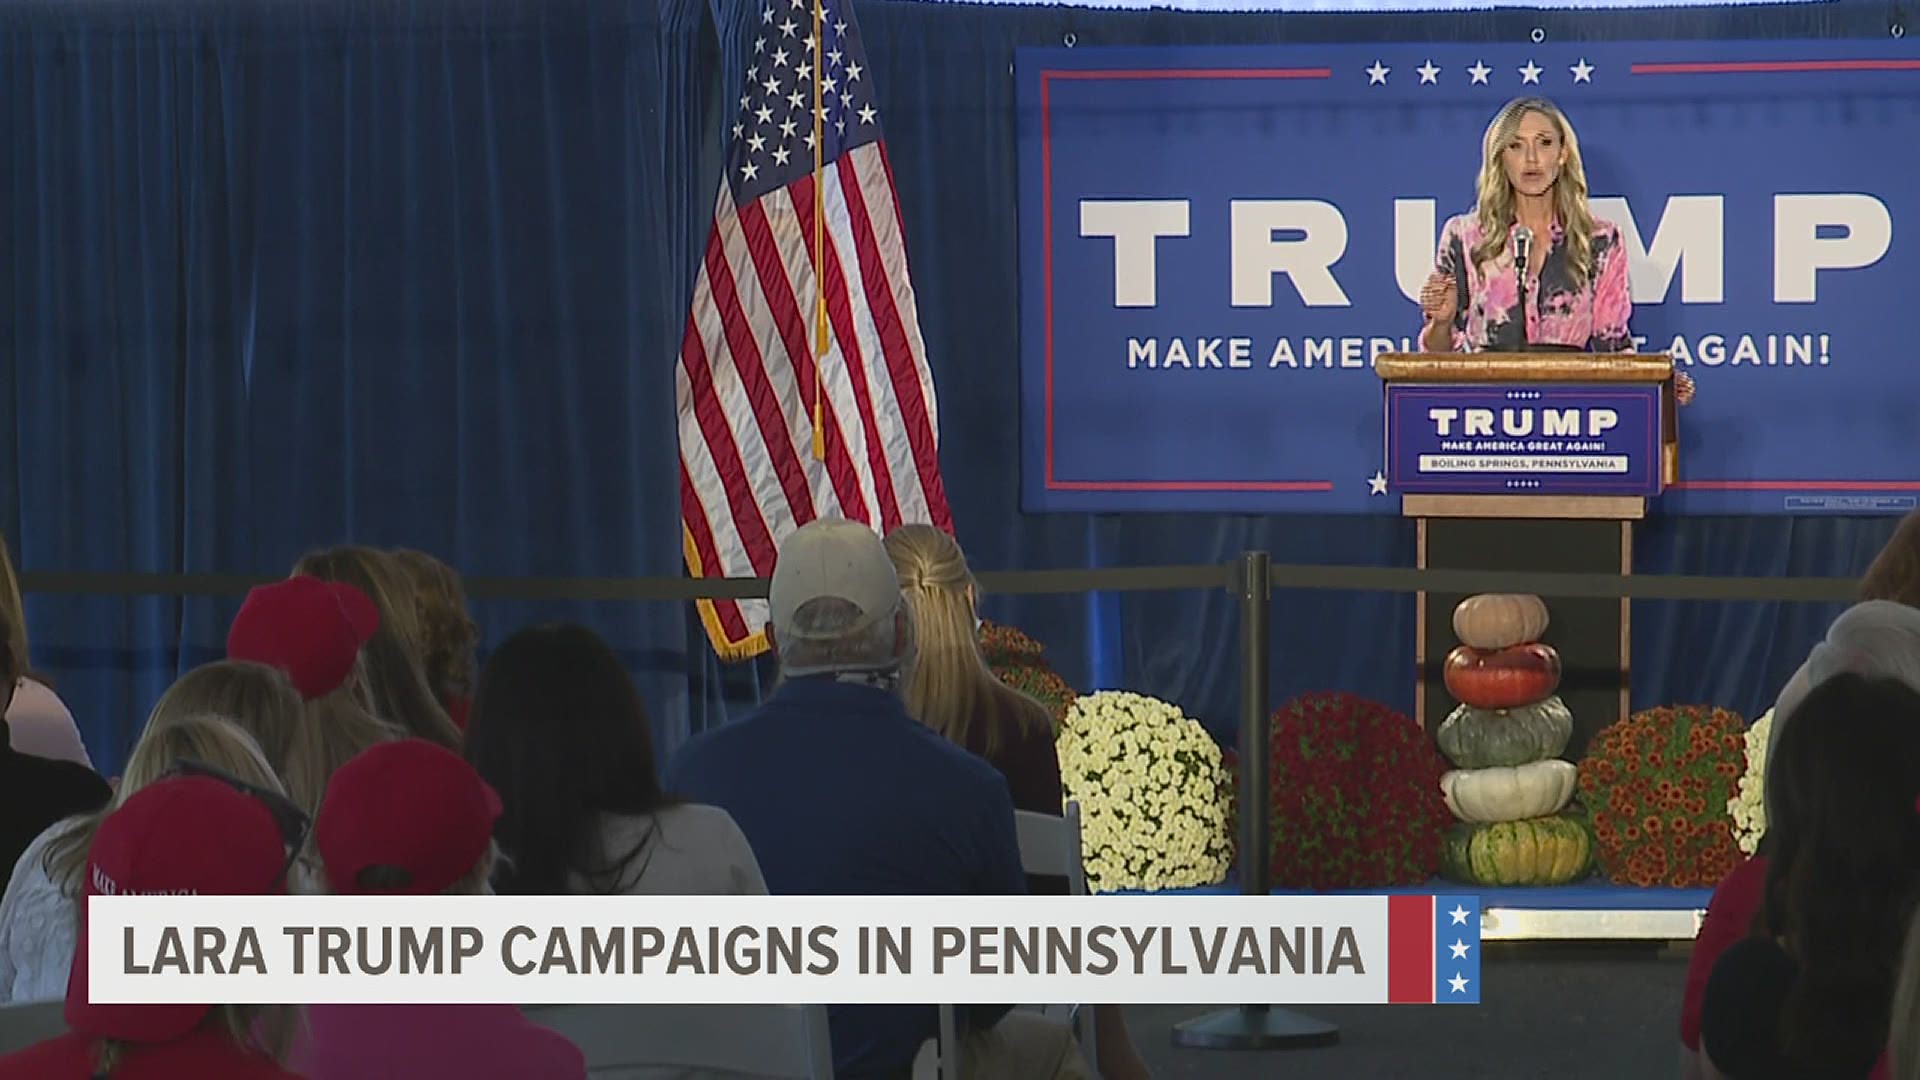 The president's daughter-in-law sought to energize female Pennsylvania voters, whose support for President Donald Trump is flagging, according to recent polls.